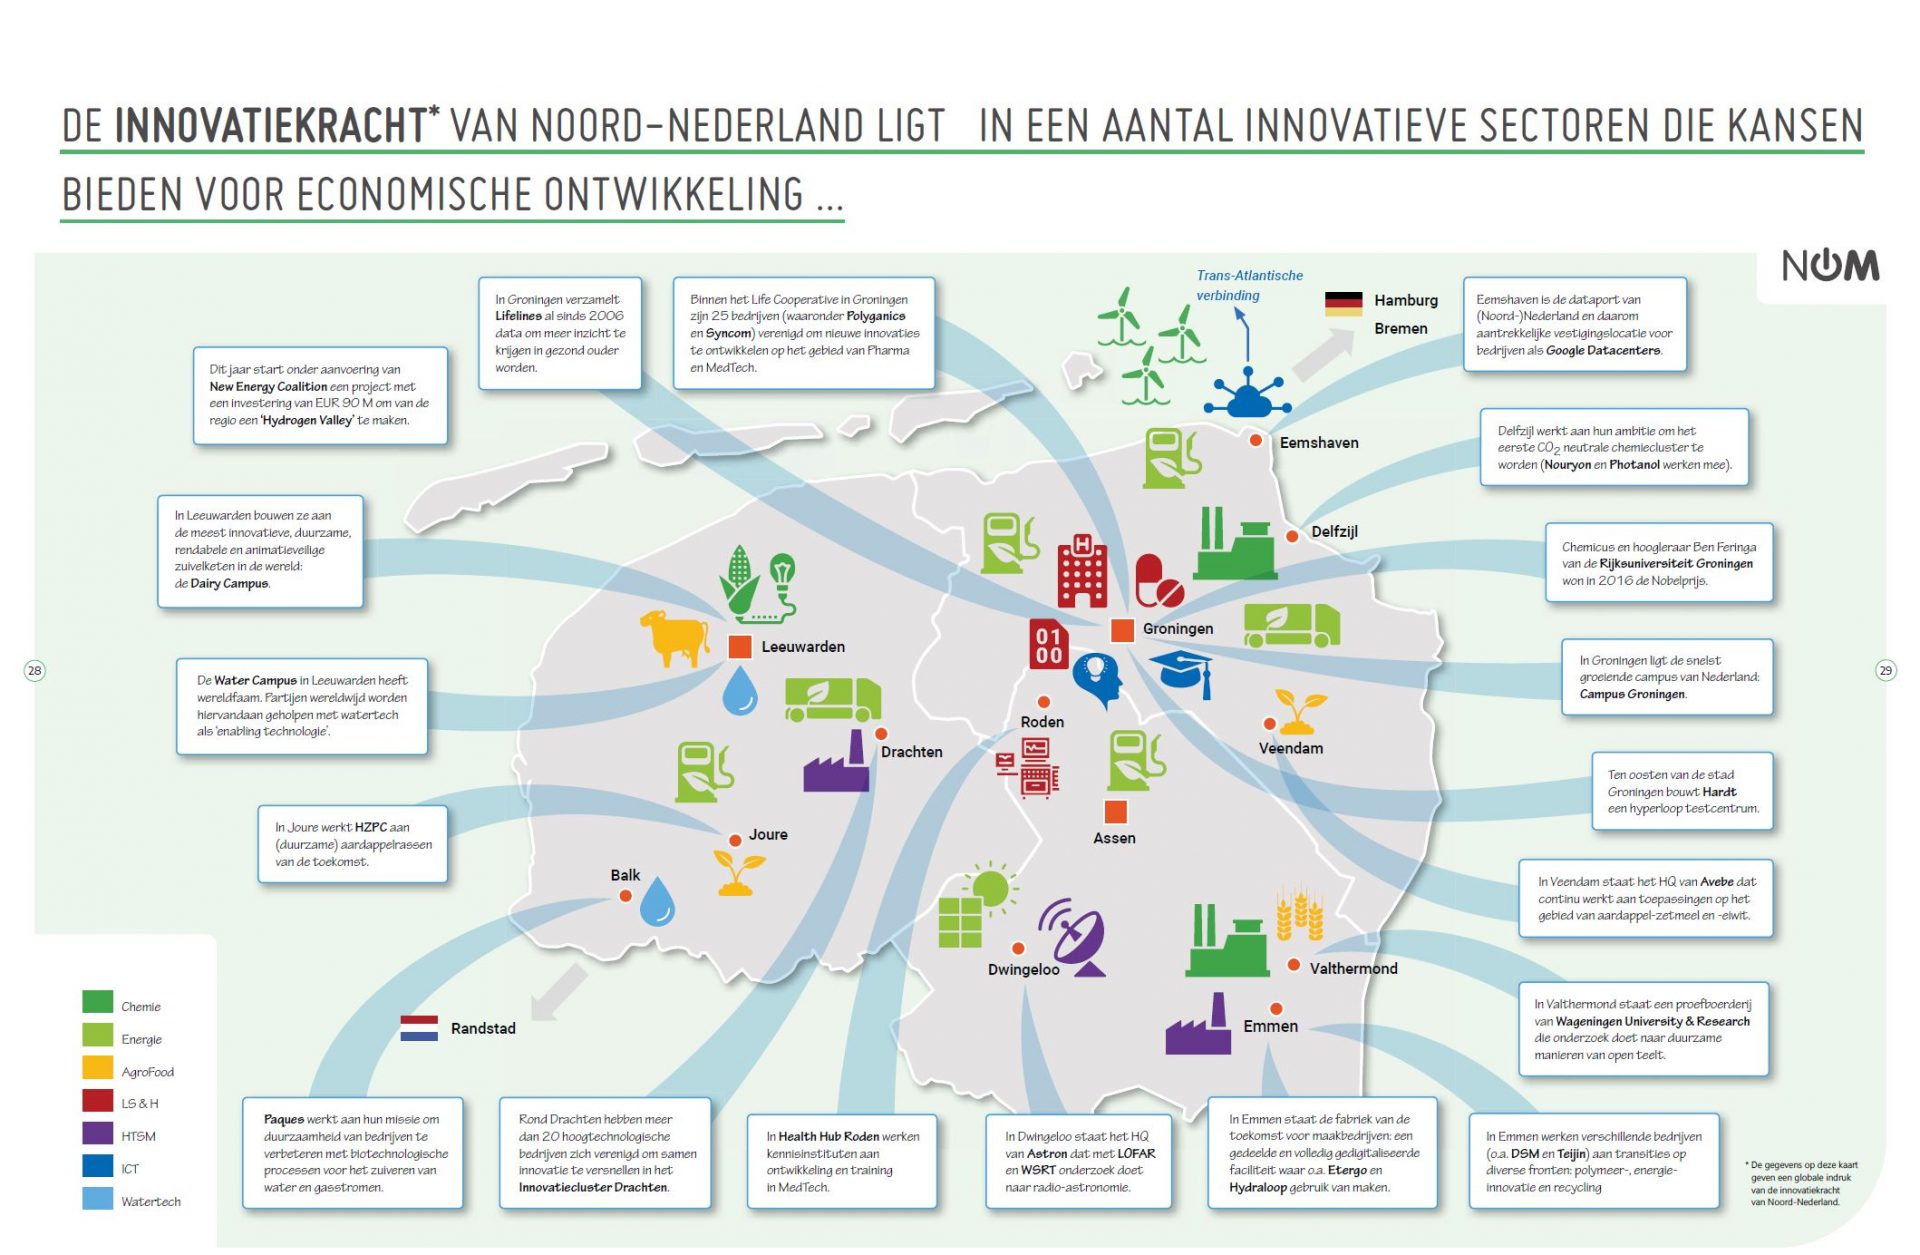 Innovation power of the Northern Netherlands